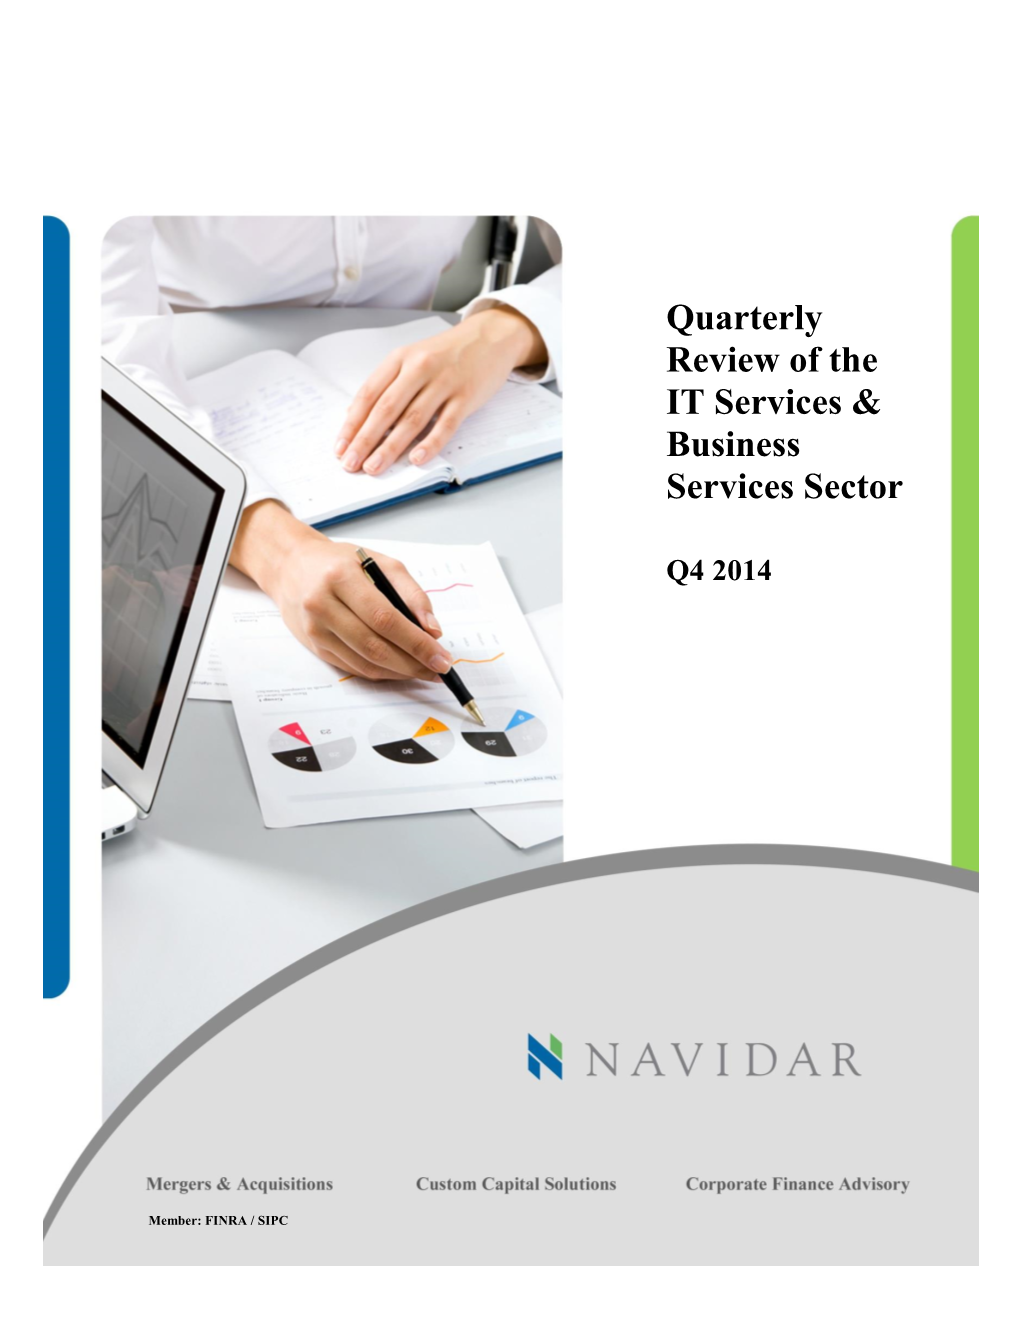 Quarterly Review of the IT Services & Business Services Sector